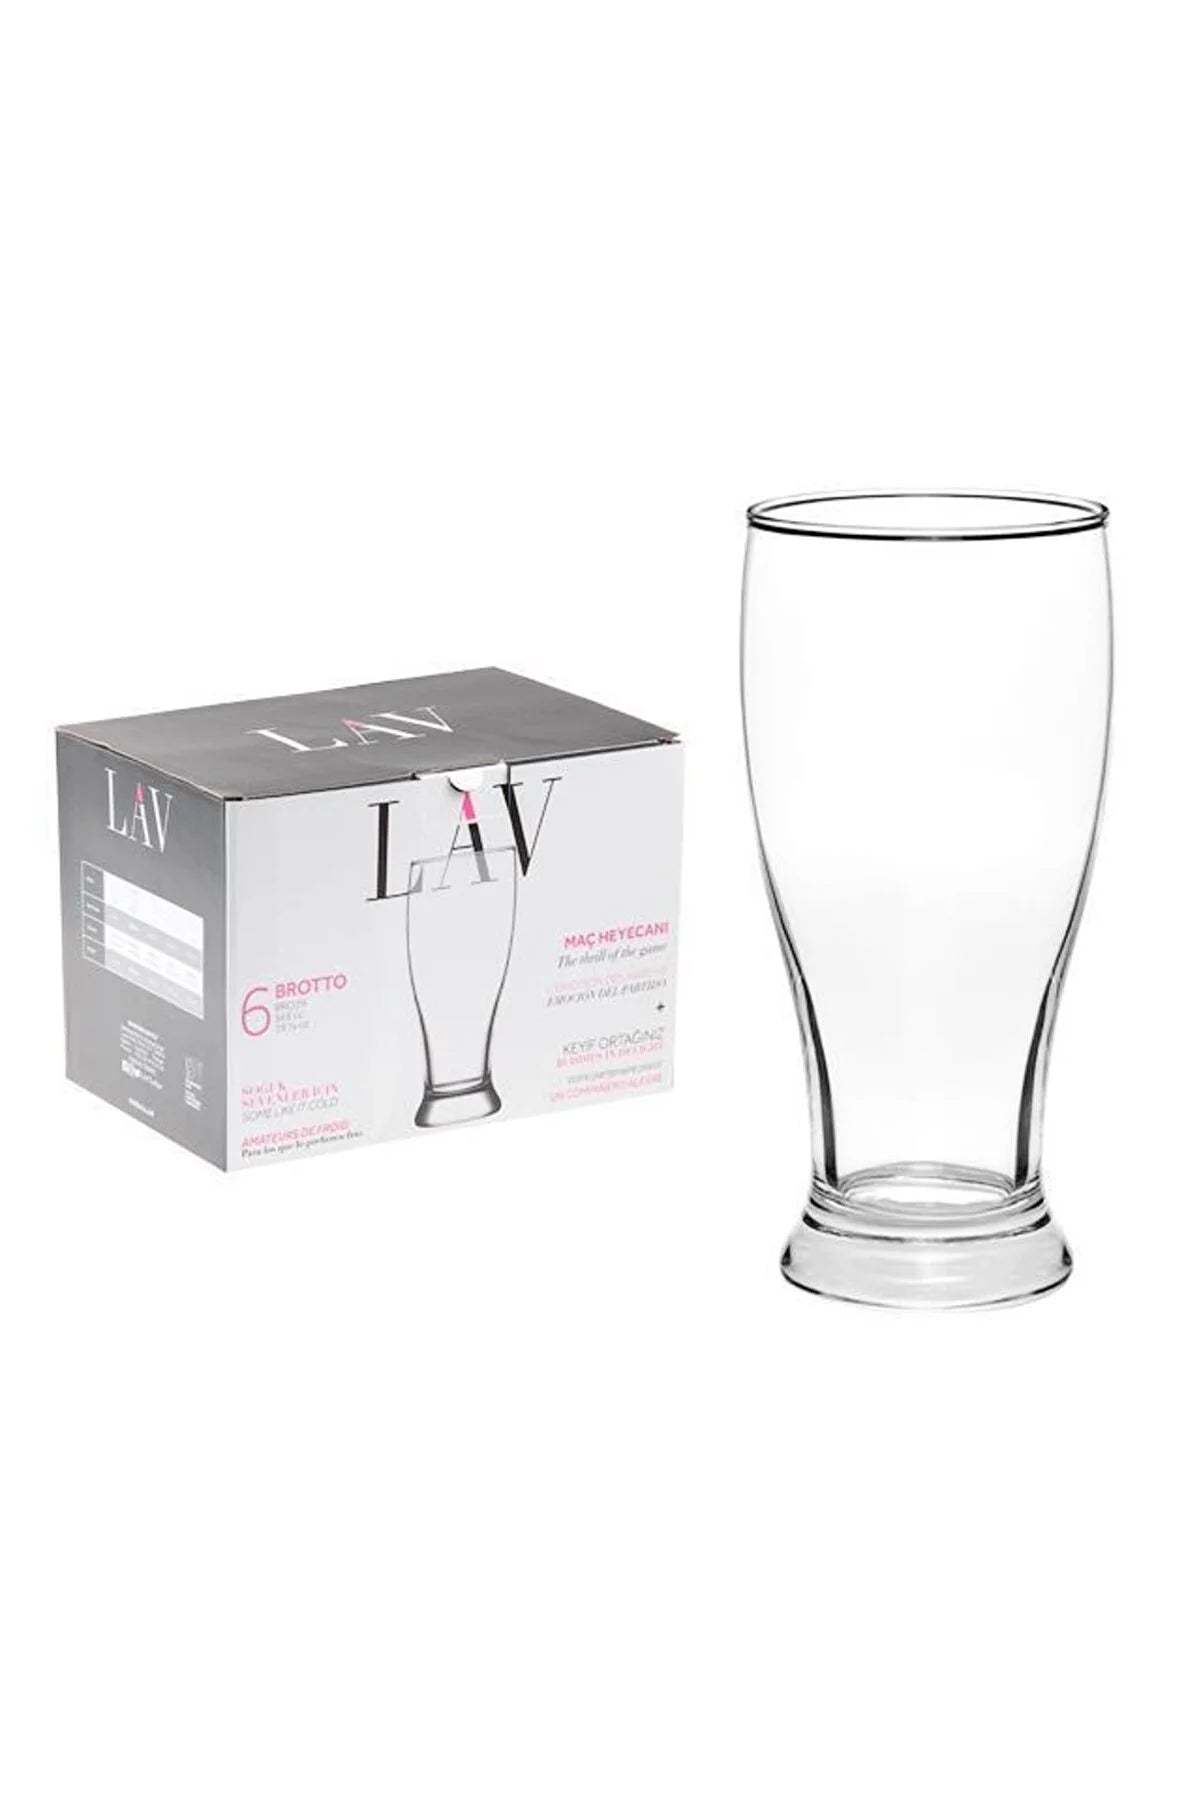 LAV Brotto Beer Glasses Sets of 6, 565cc